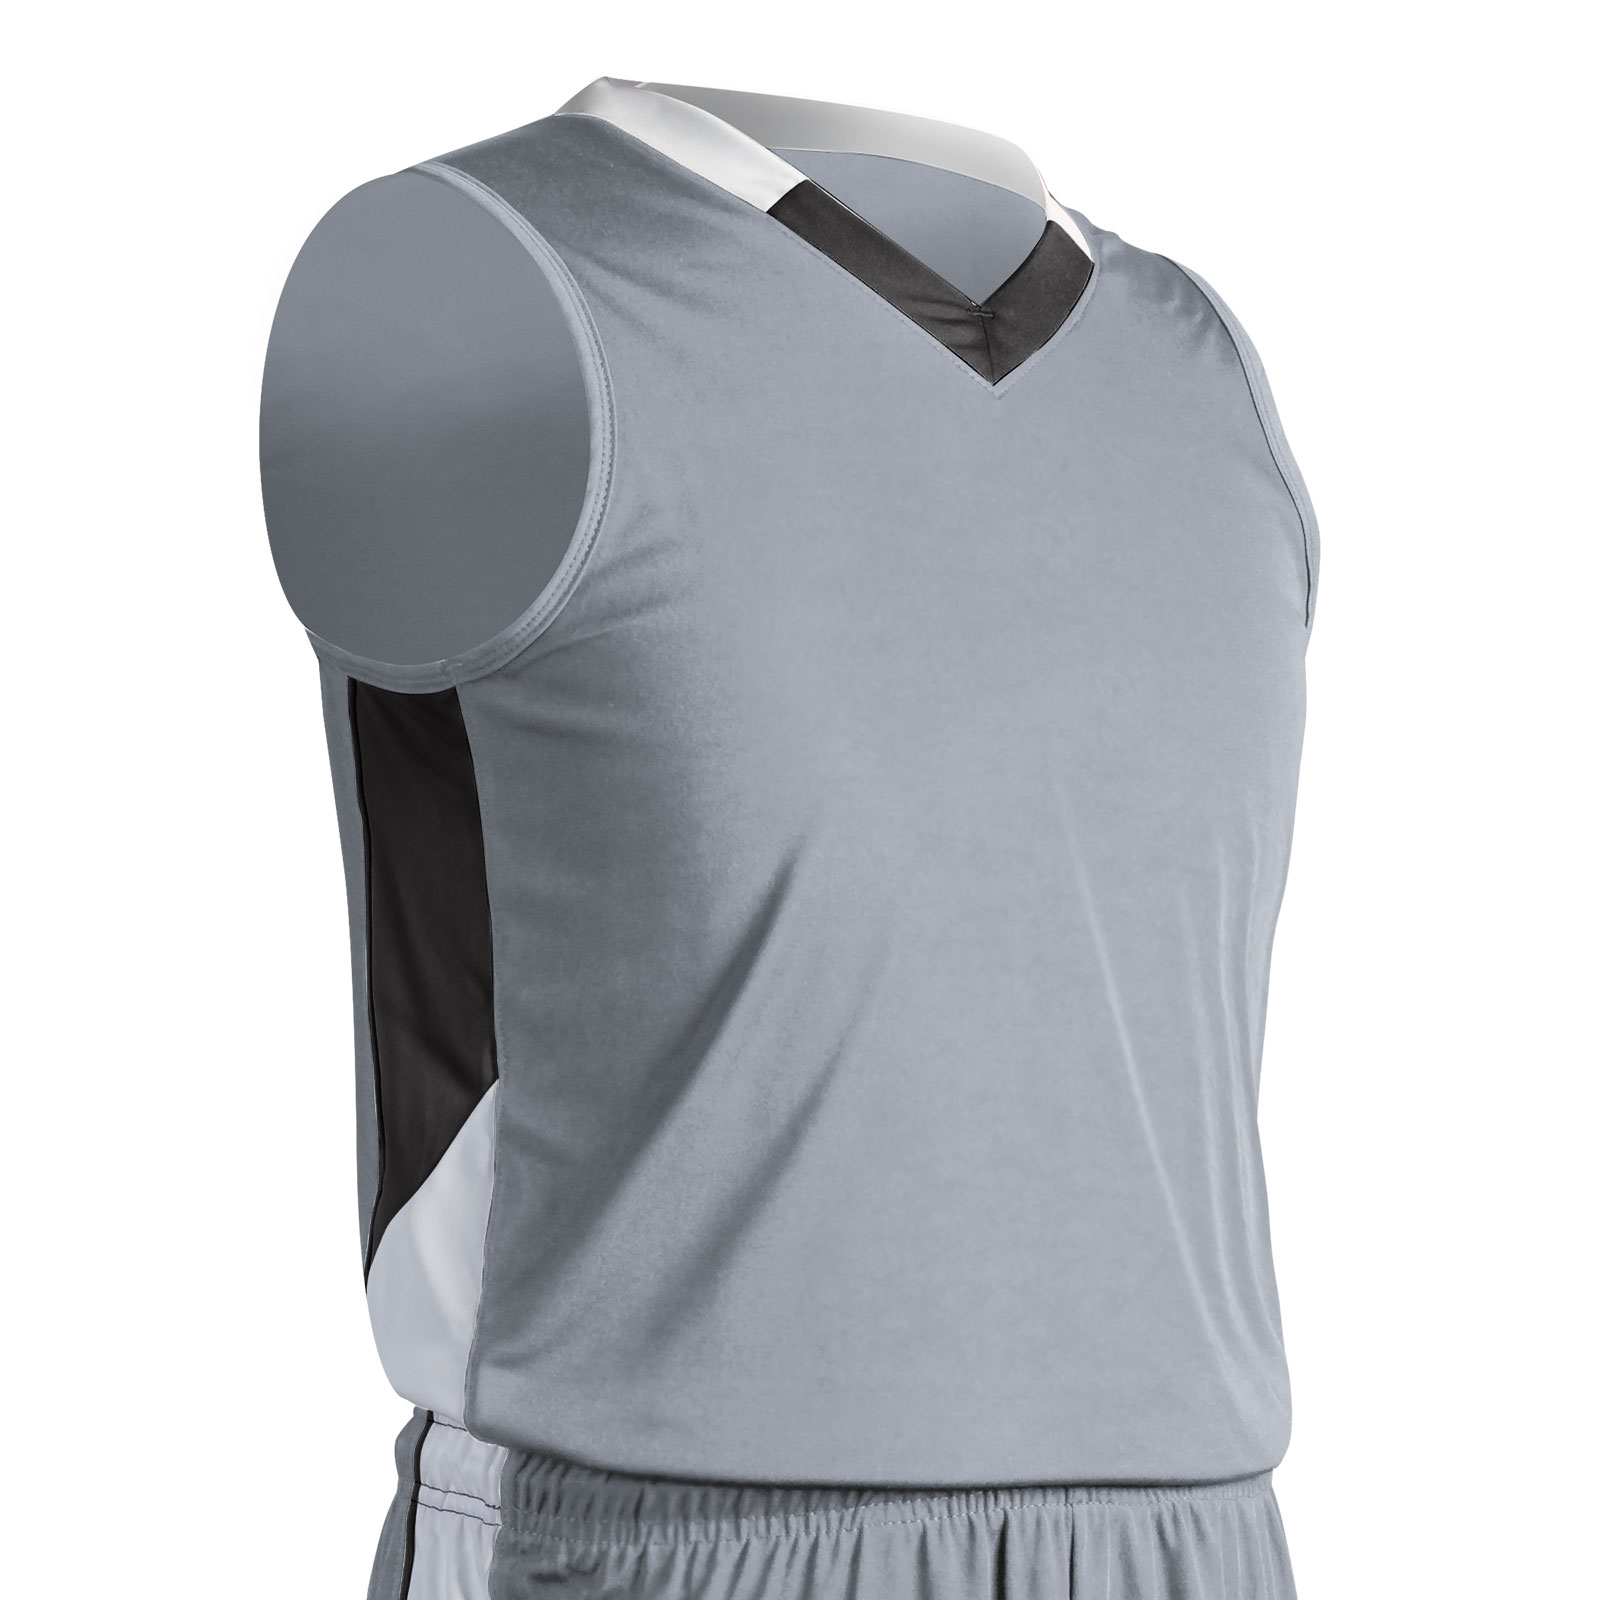 Gray Basketball Jersey Outfit White Vented Sides with Pockets 